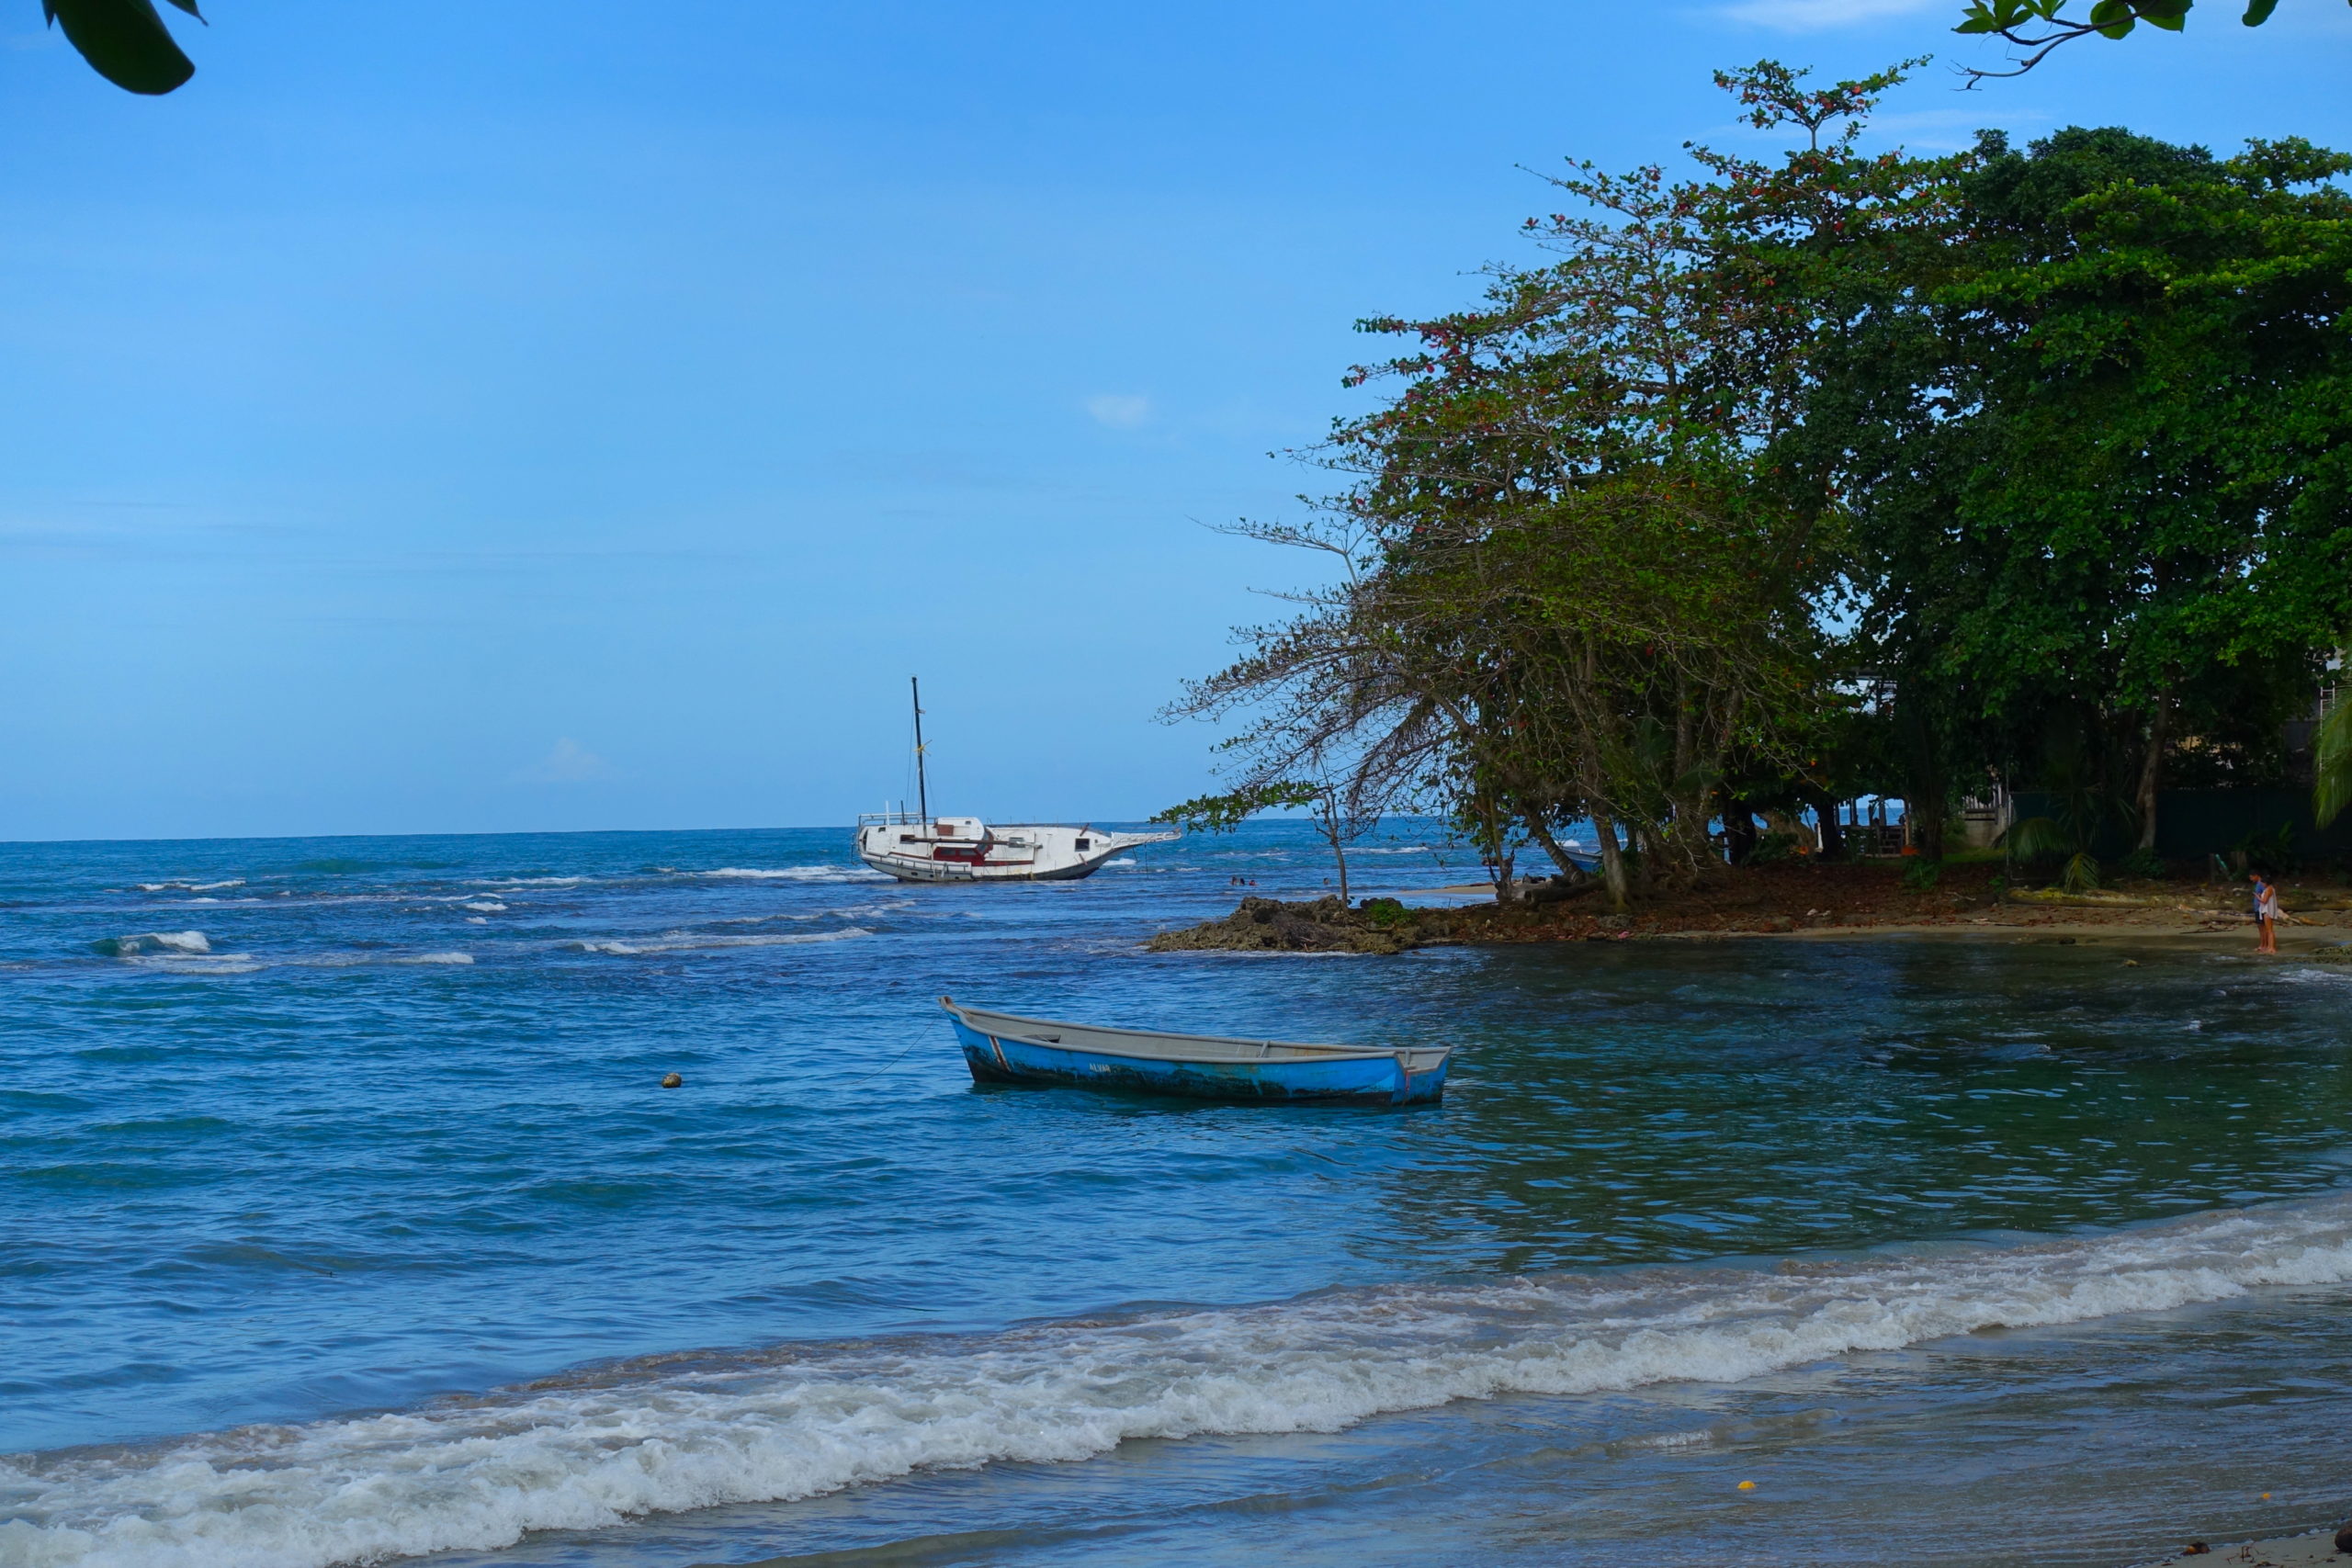 Puerto Viejo beach and the little shipwreck on the sea